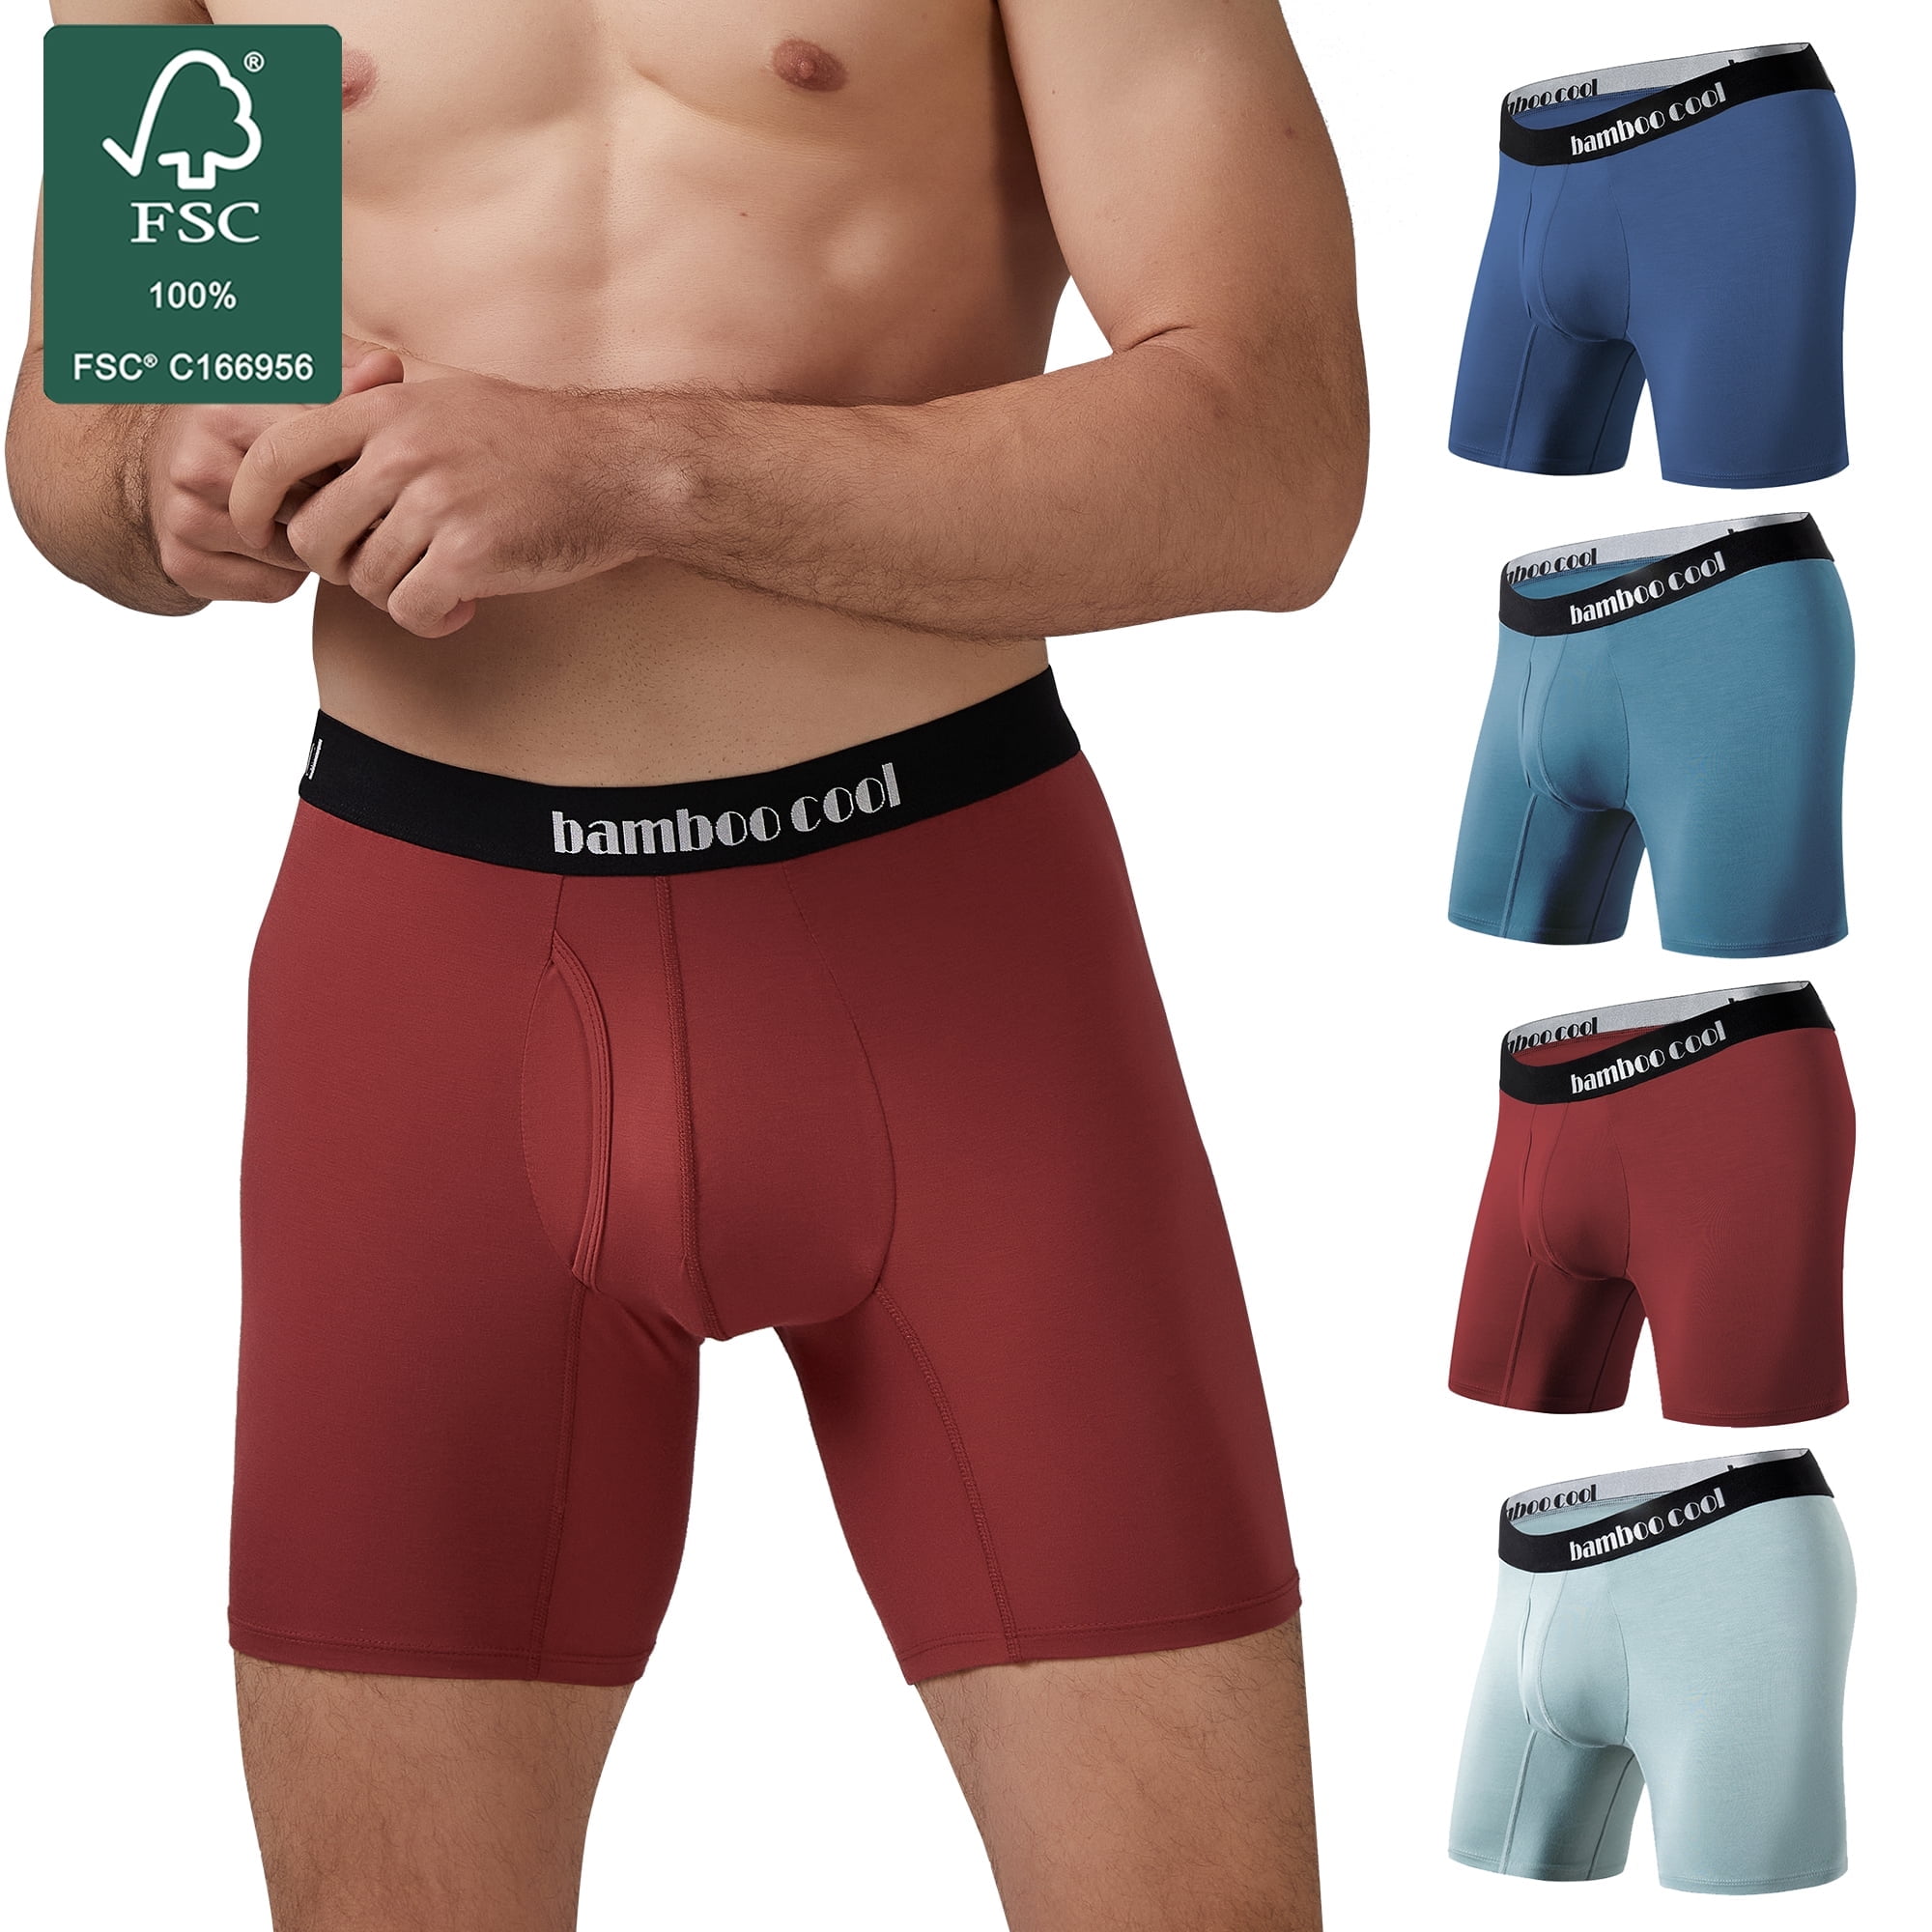 Soft Breathable 40S Bamboo Rayon Briefs 3 Pack - Separatec